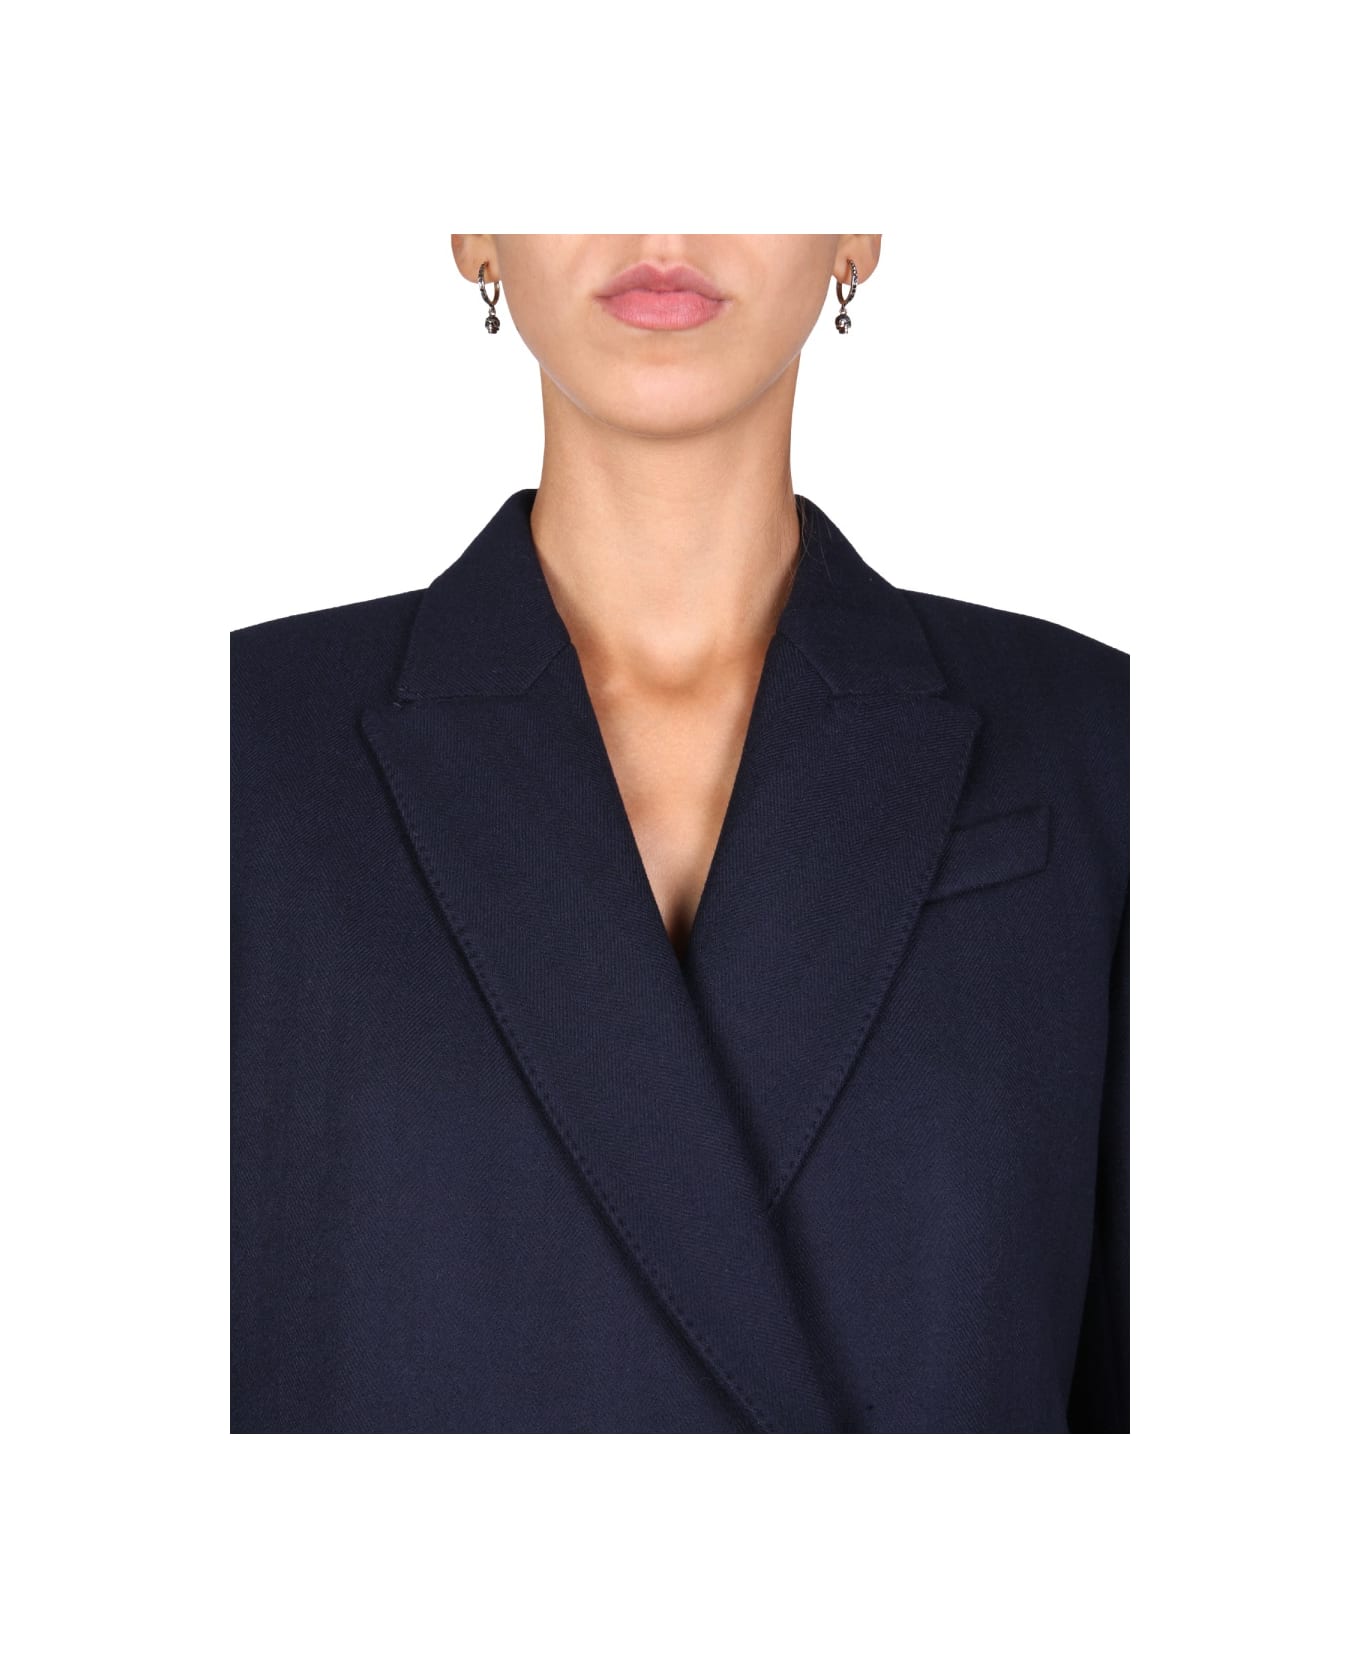 Alexander McQueen Double-breasted Jacket - BLUE